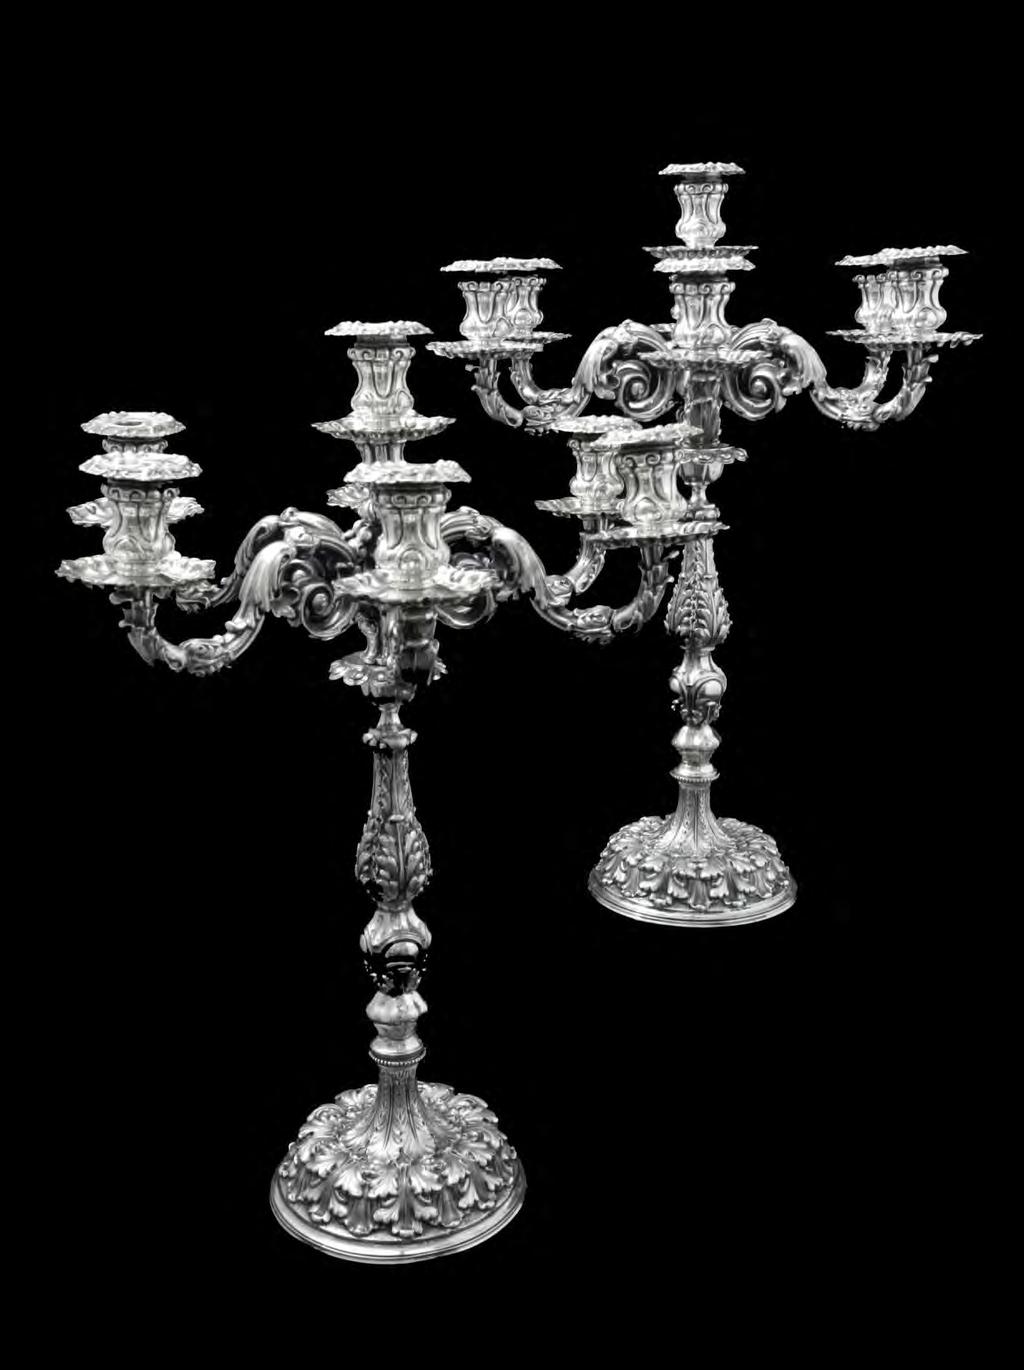 Another Extremely Rare Find, An Outstanding Pair of Italian Silver Candelabra by Internationally Known Milan Silversmith Luigi Genazzi in a Classic